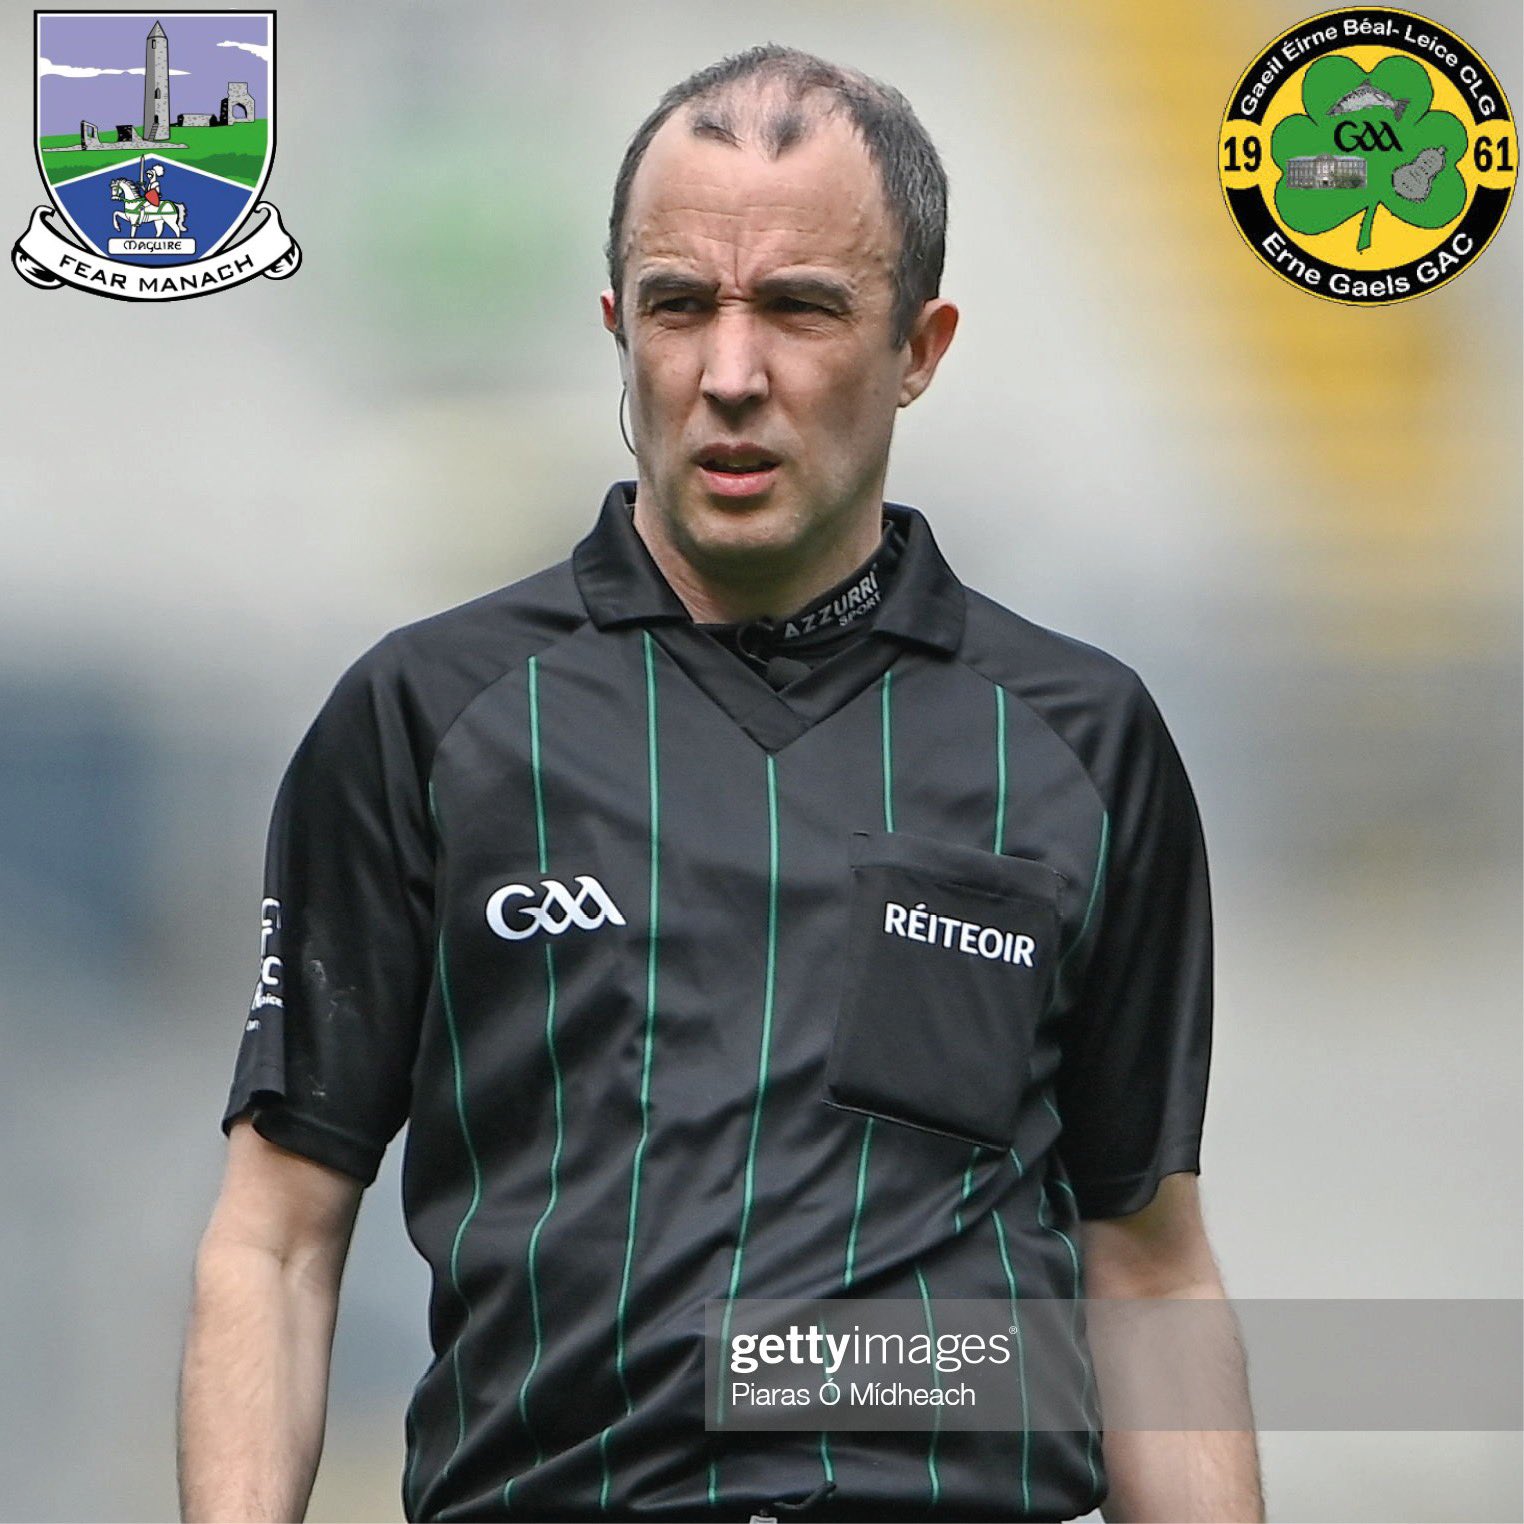 Niall Cullen to Referee All Ireland Minor Final